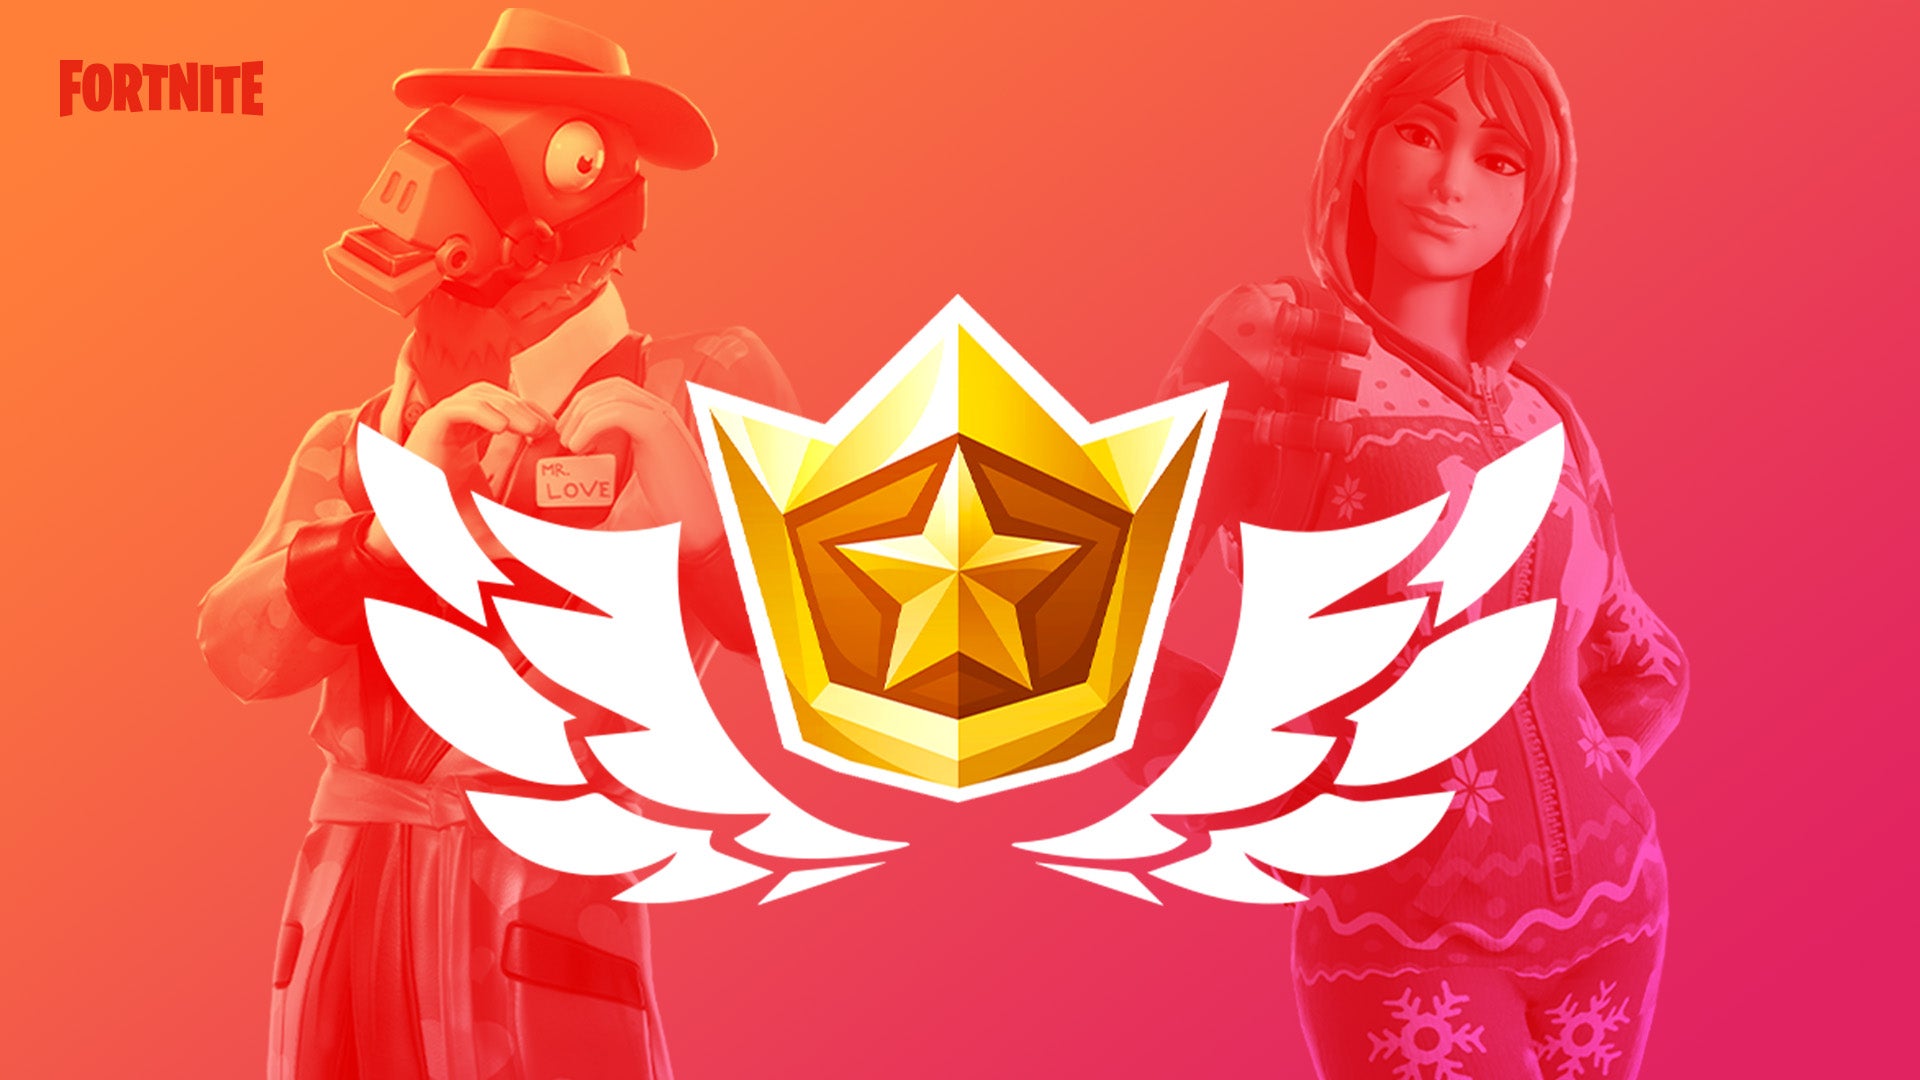 Image for Fortnite v7.40 update: complete the Overtime Challenges to get your Season 8 Battle Pass for free